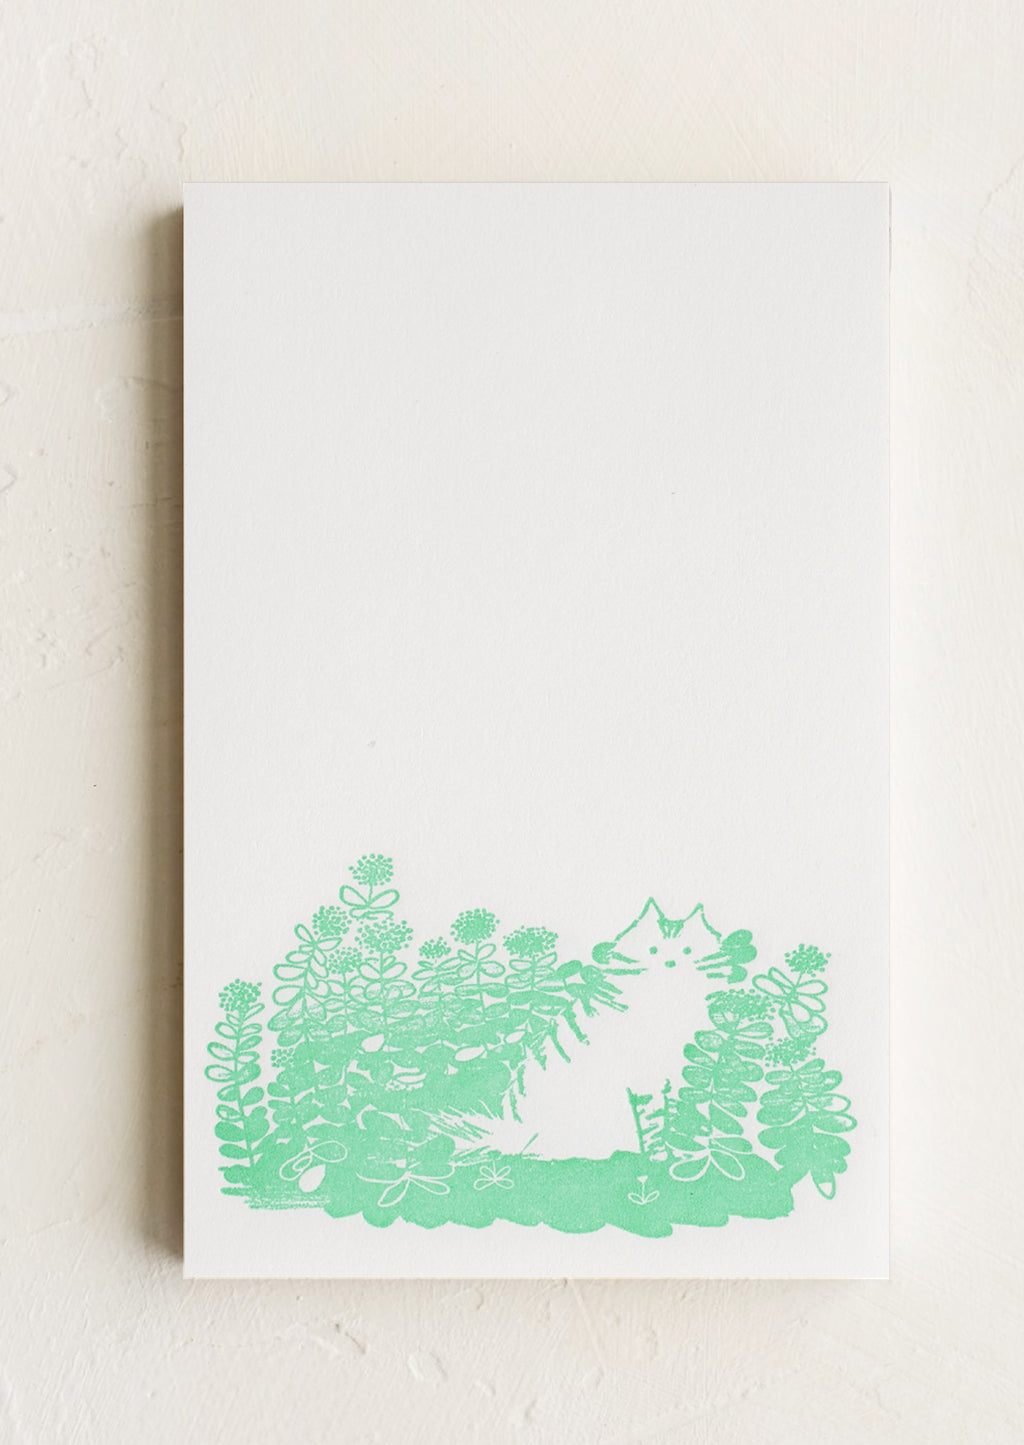 Fluffy Cat: A letterpress printed notepad with cat design at bottom.